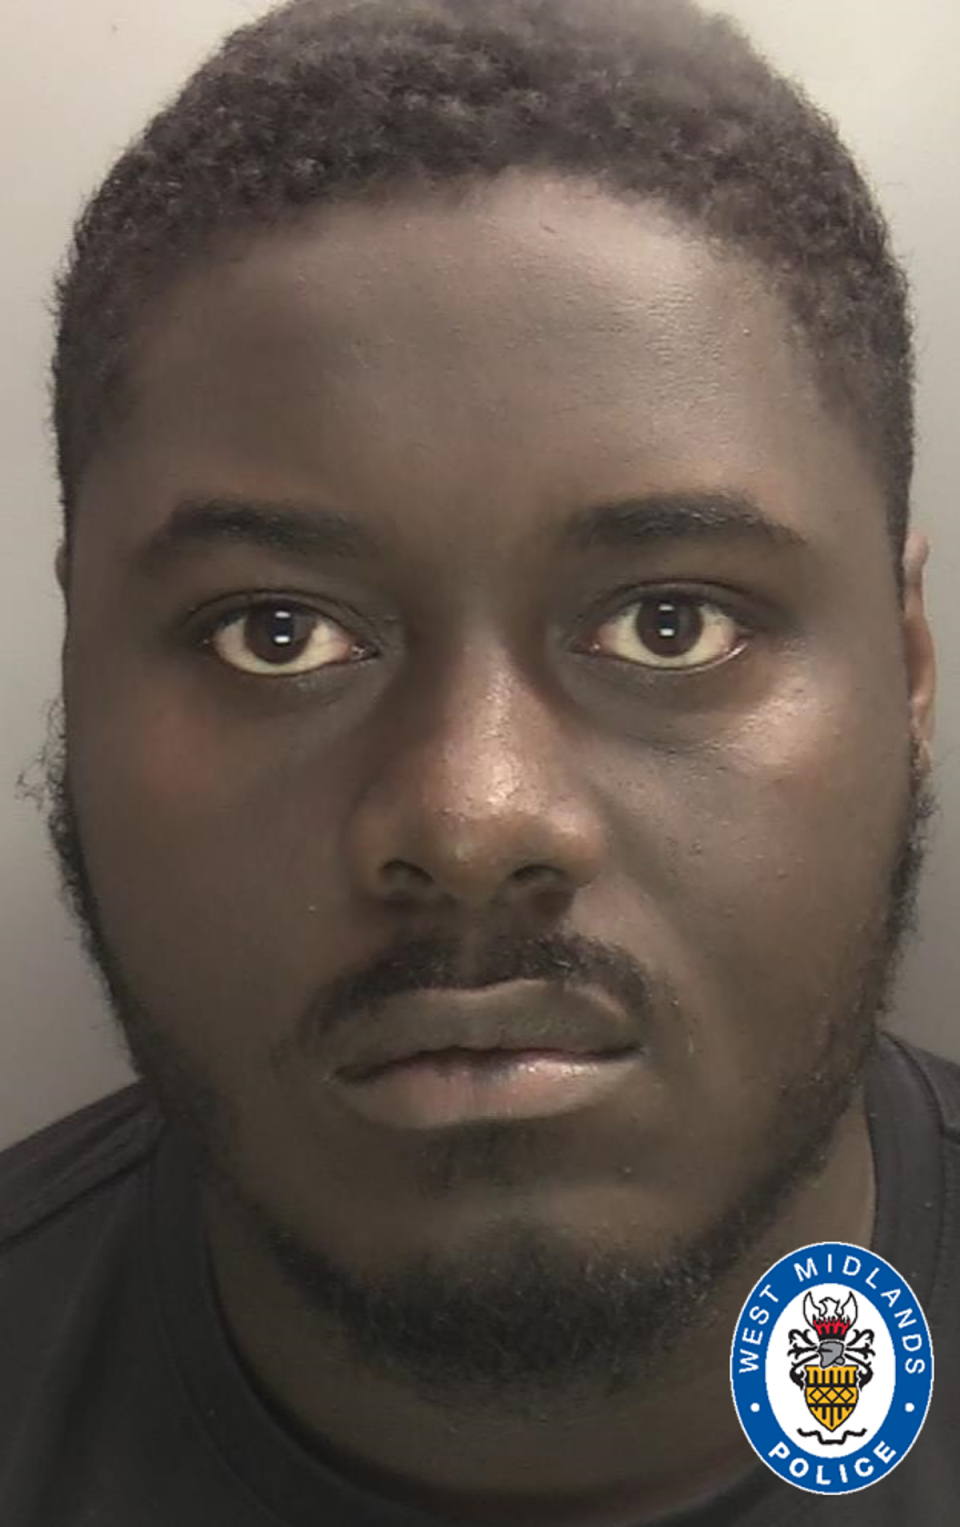 Jordell Duquesney was found with balaclavas and gloves when arrested by police (West Midlands Police)